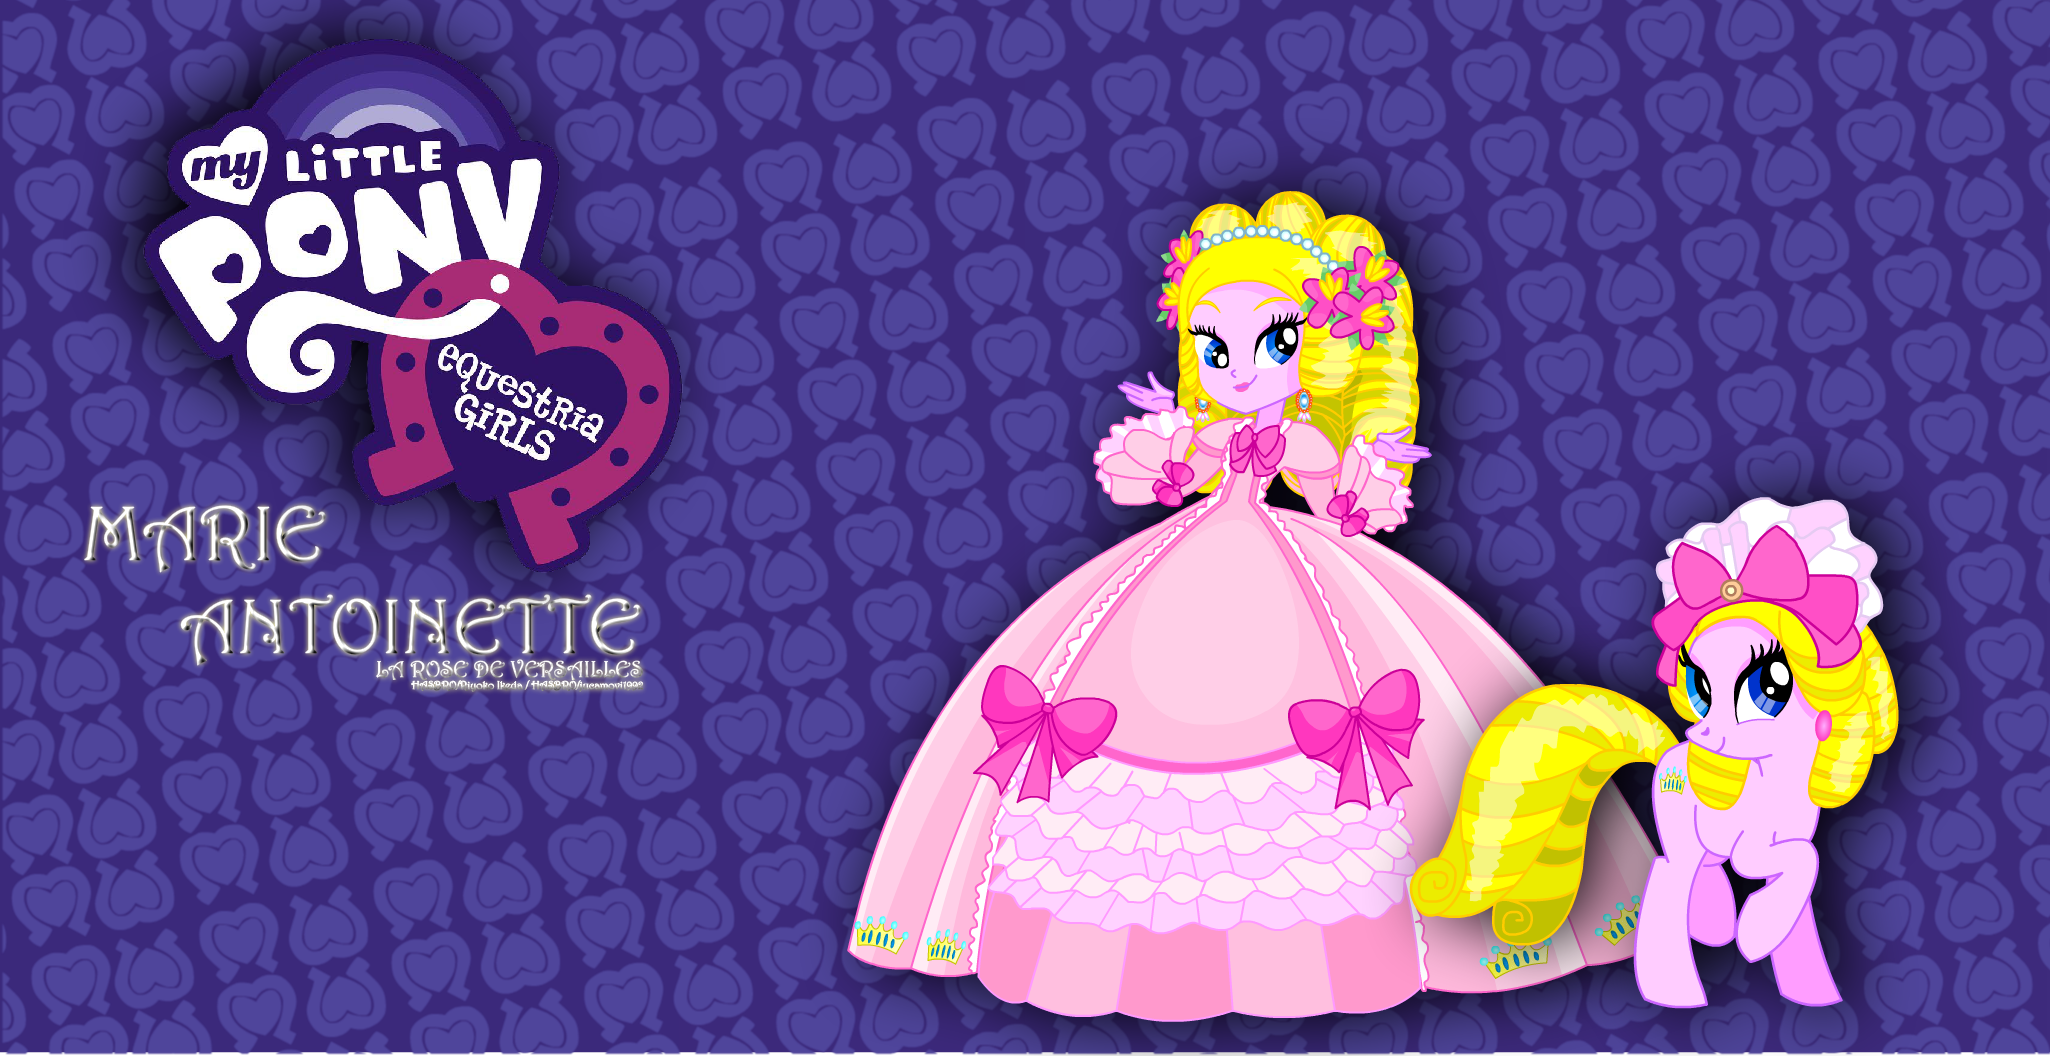 marie_antoinette_equestria_girls_version_2_by_jucamovi1992-d6dcag7